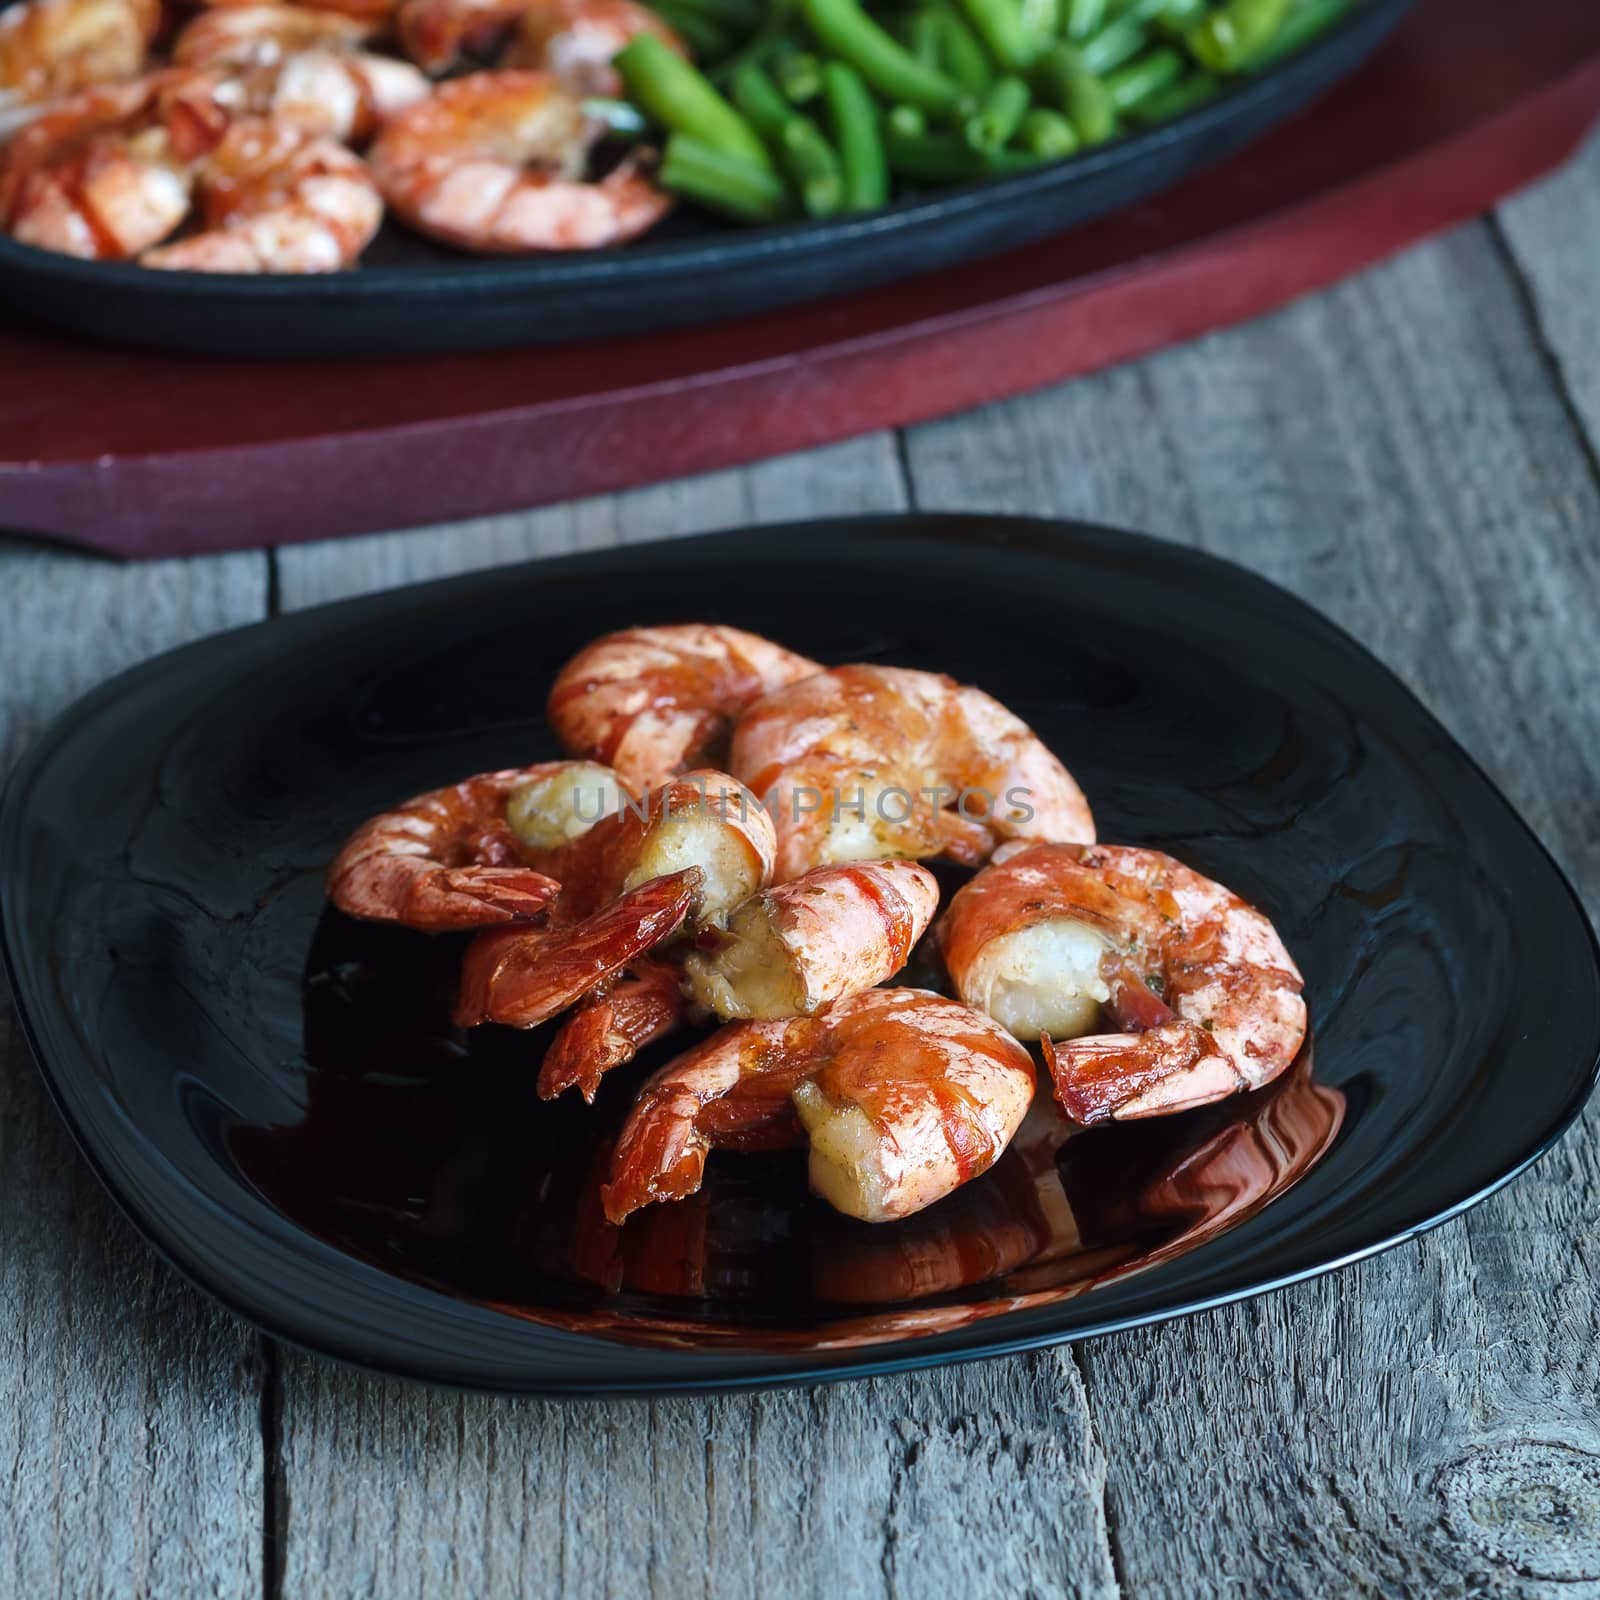 Dish with fried shrimp and green beans on wooden background